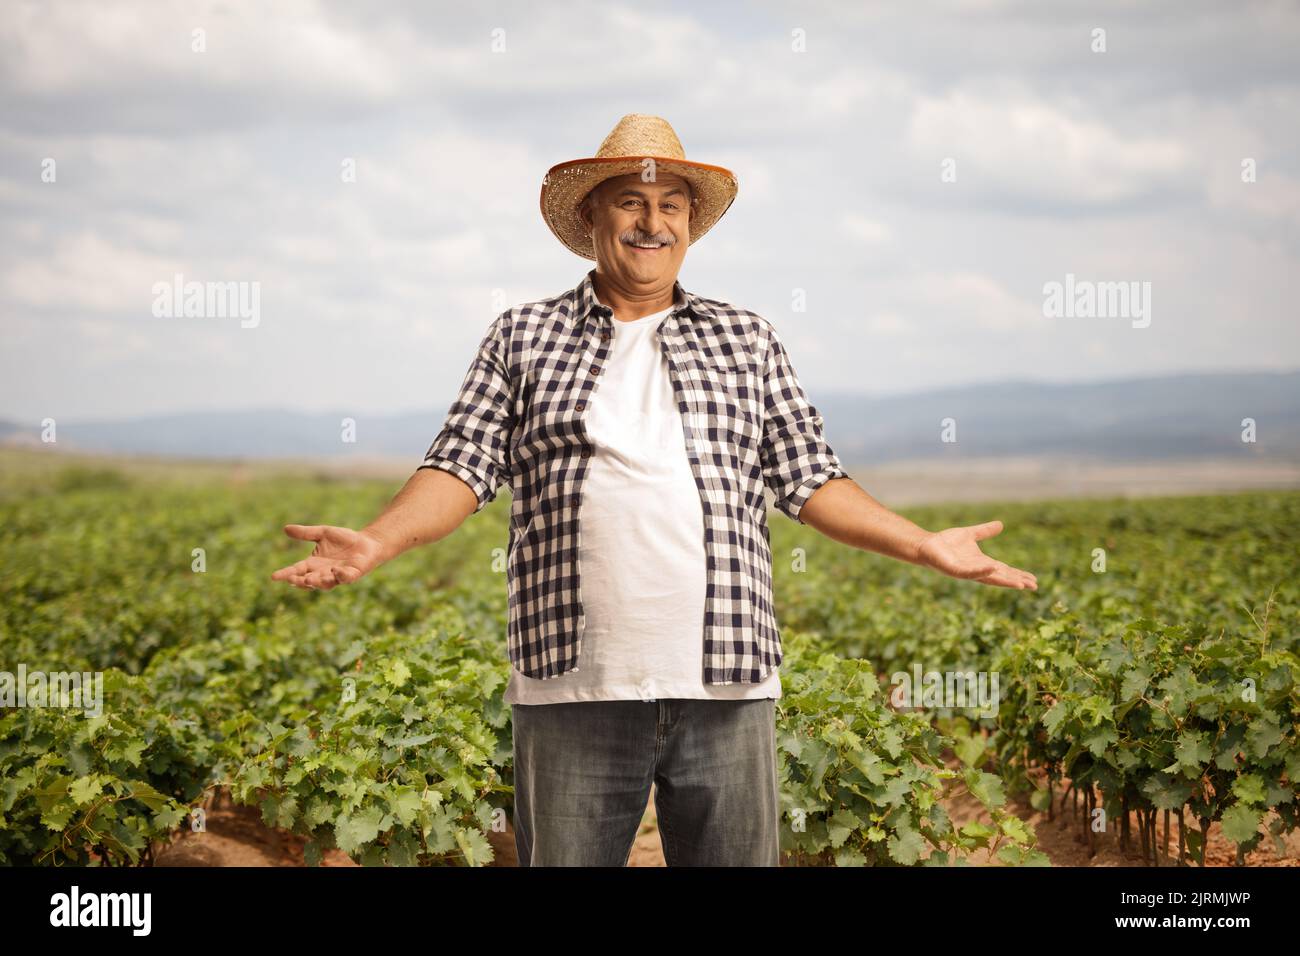 Mature male worker standing on a grapevine nursery and gesturing with hands Stock Photo